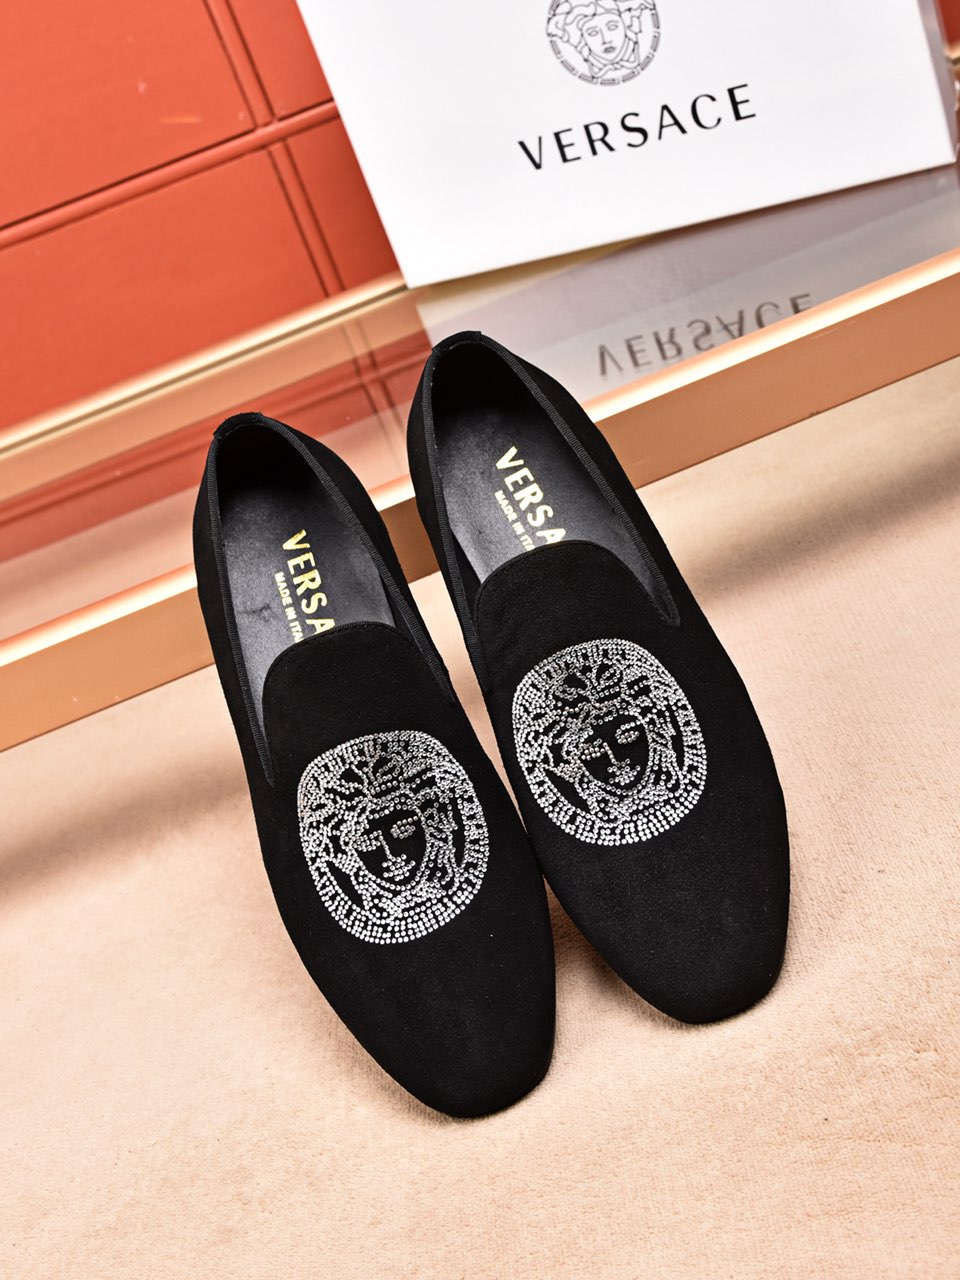 versace mens loafer shoes